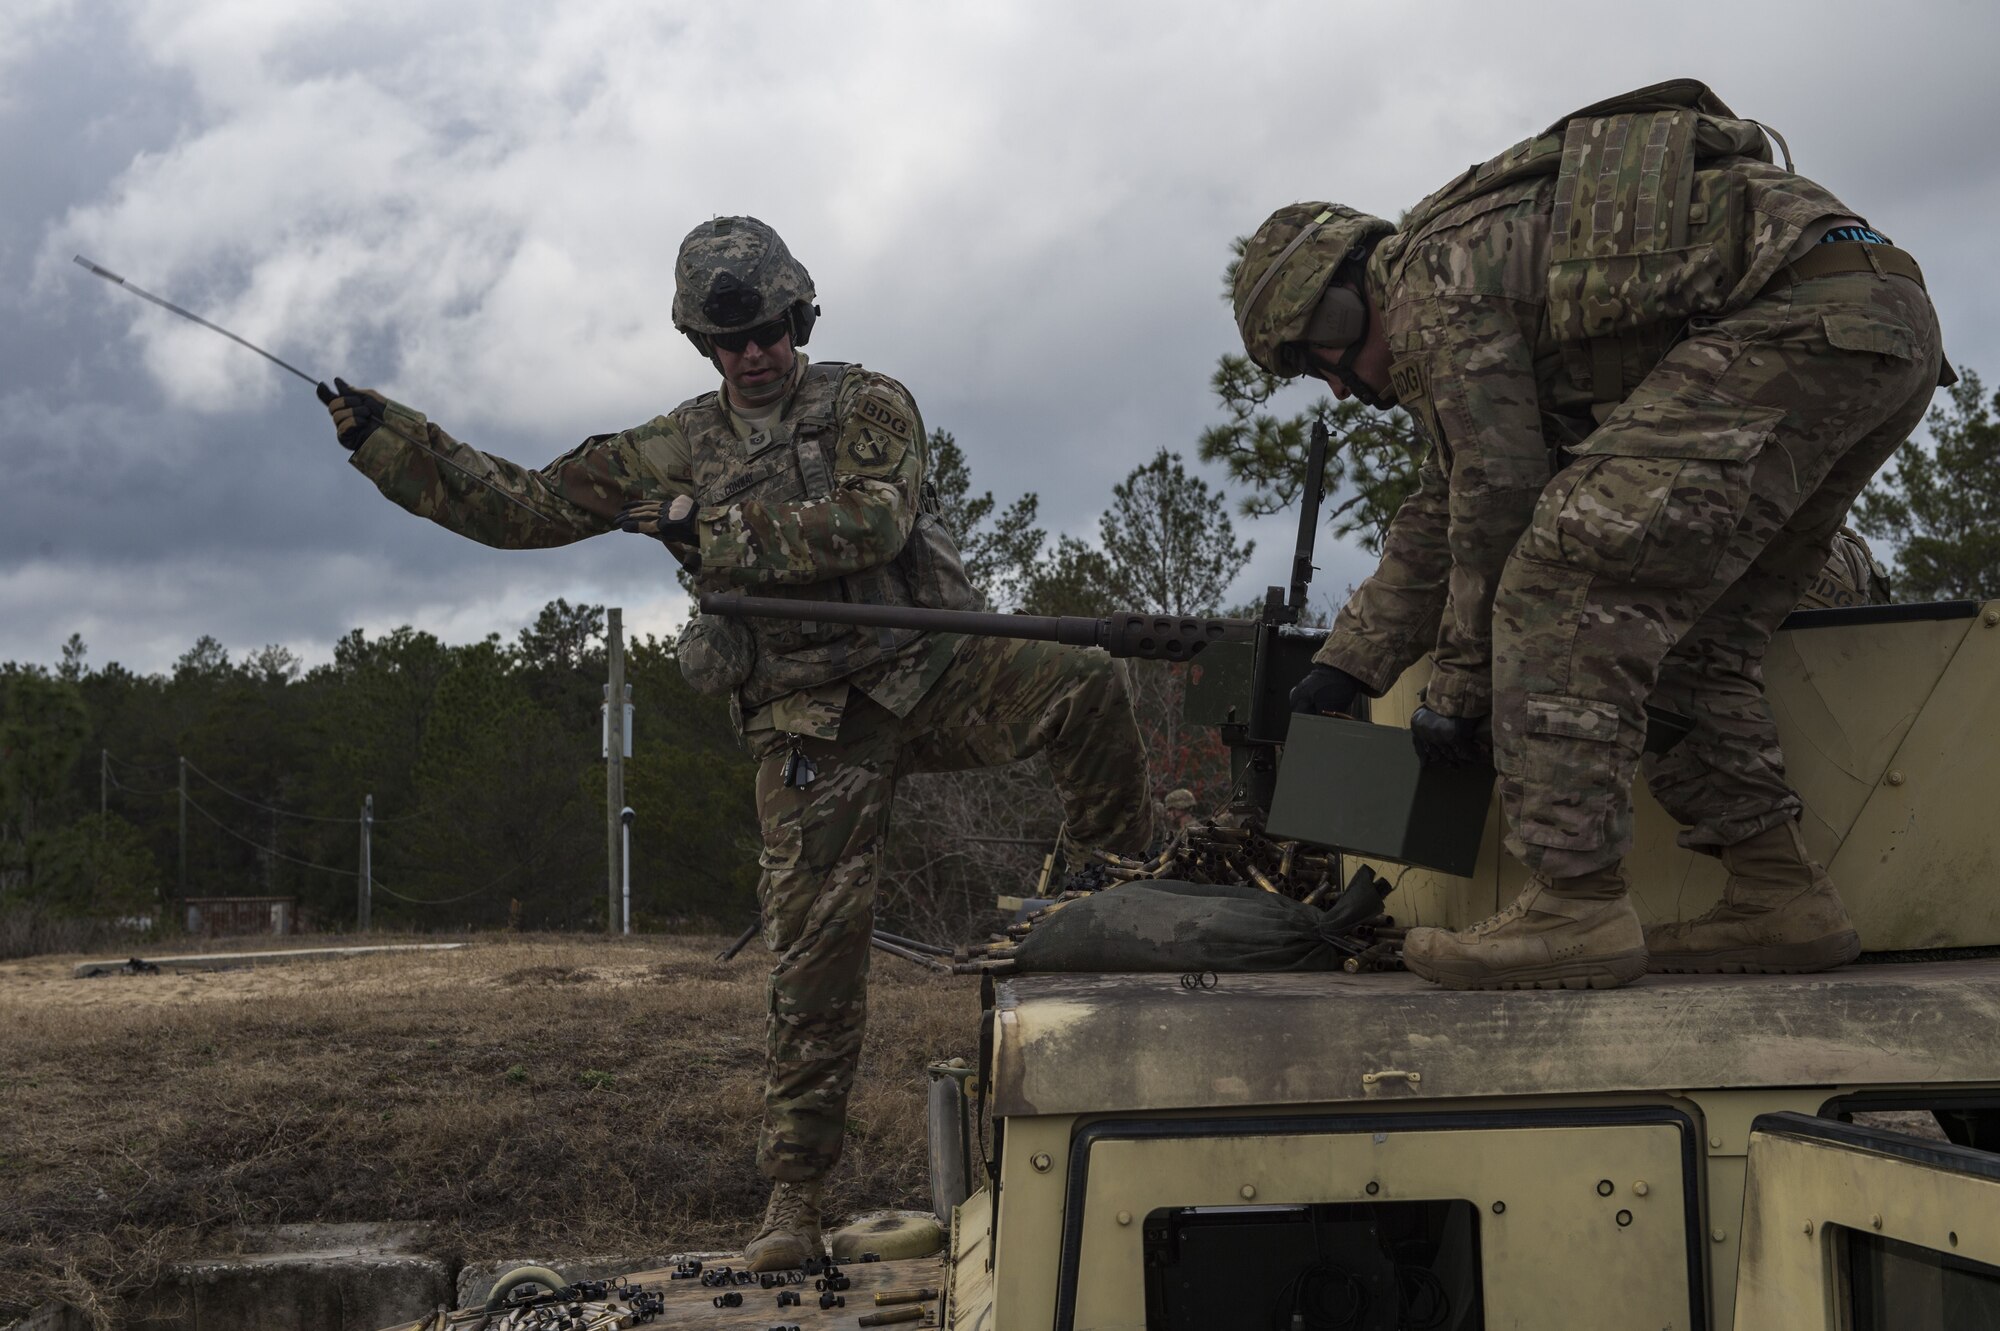 Airmen from the 824th Base Defense Squadron ensure a M2 machine gun is clear during Weapons Week, Jan. 23, 2018, at Camp Blanding Joint Training Center, Fla. During Weapons Week, Airmen qualify on heavy weapons to include the M2 machine gun, Mark 19 40mm grenade machine gun, M240B machine gun, M249 light machine gun, M136E1 AT4-CS confined space light anti-armor weapon, and M18 Claymore mine. (U.S. Air Force photo by Senior Airman Janiqua P. Robinson)